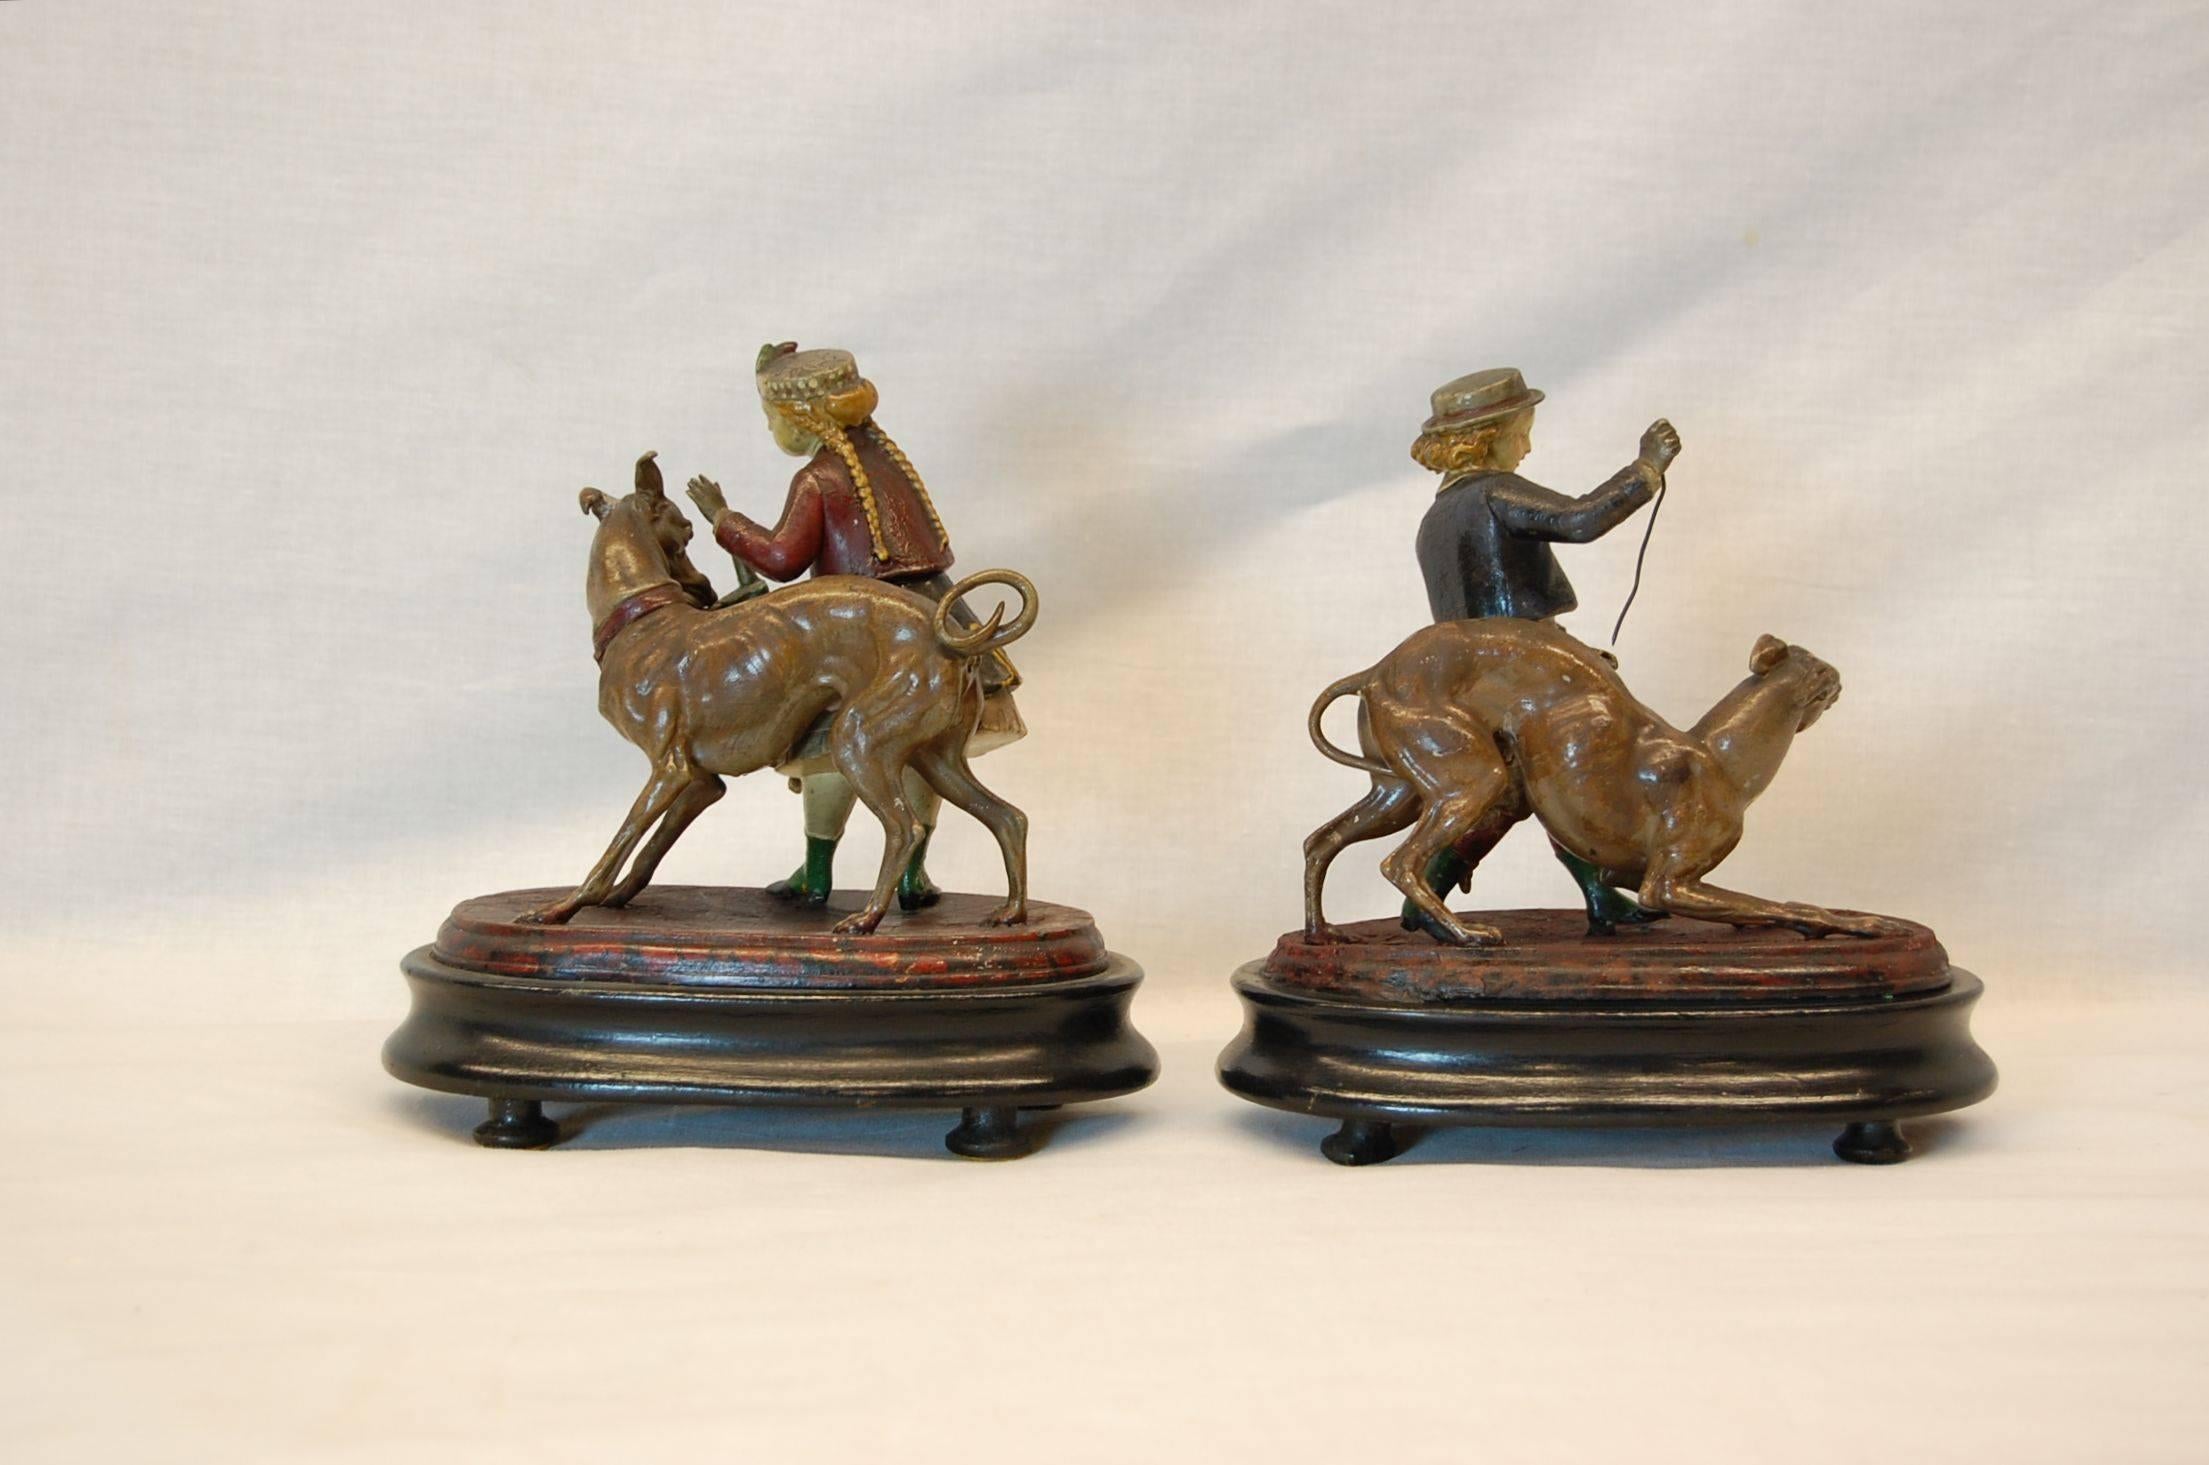 Hand-Painted Pair of Metal Figurines Featuring Children and Their Dogs, circa 1890 For Sale